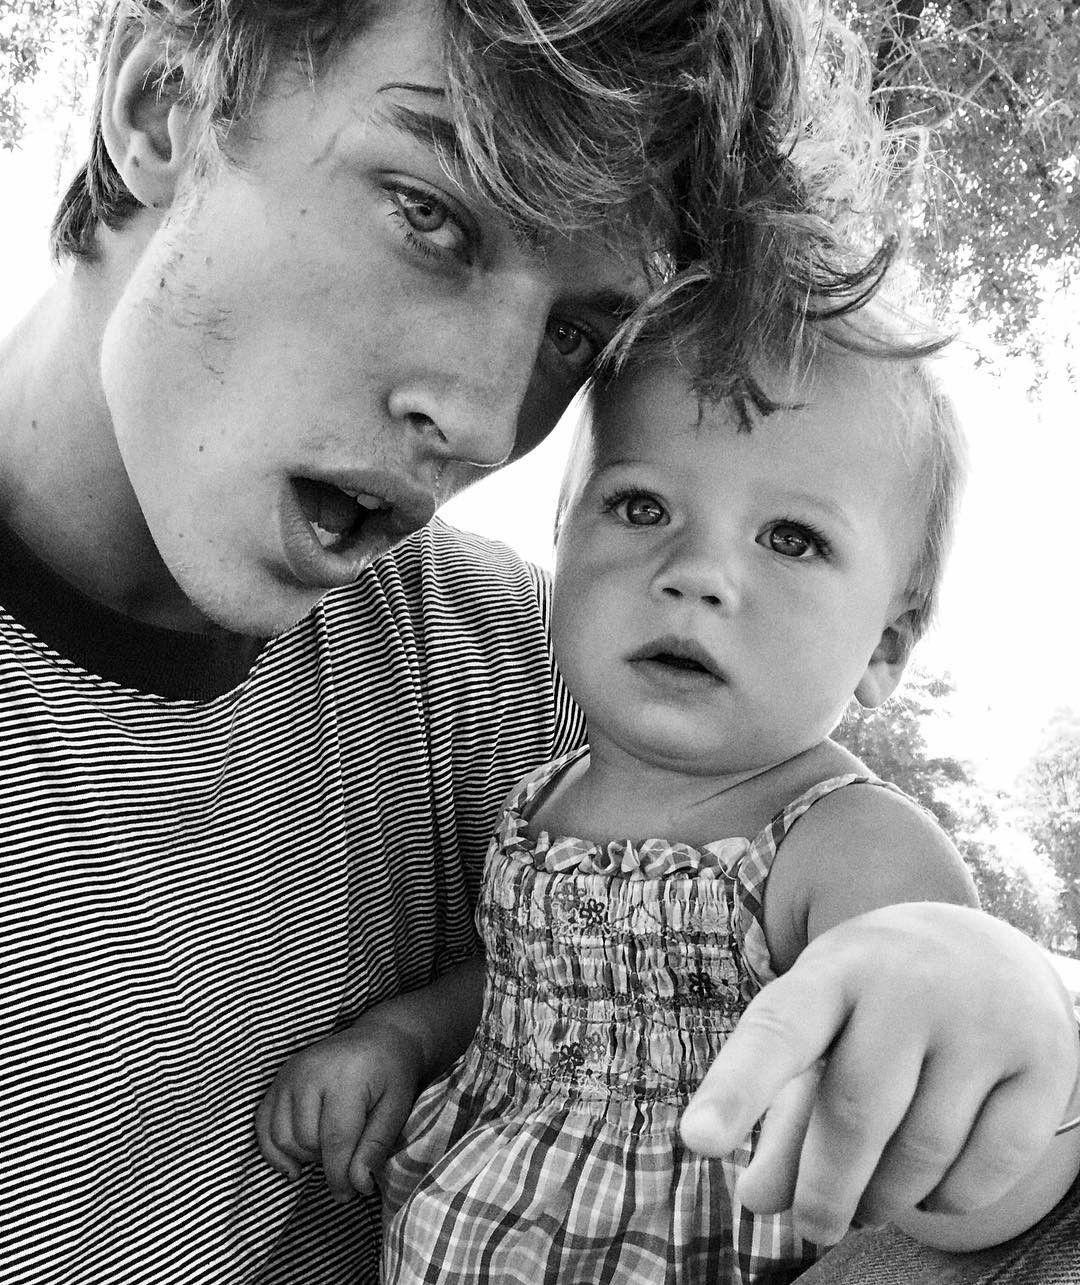 Lucky Blue and Gravity Blue Smith. B O Y S ❤ in 2019